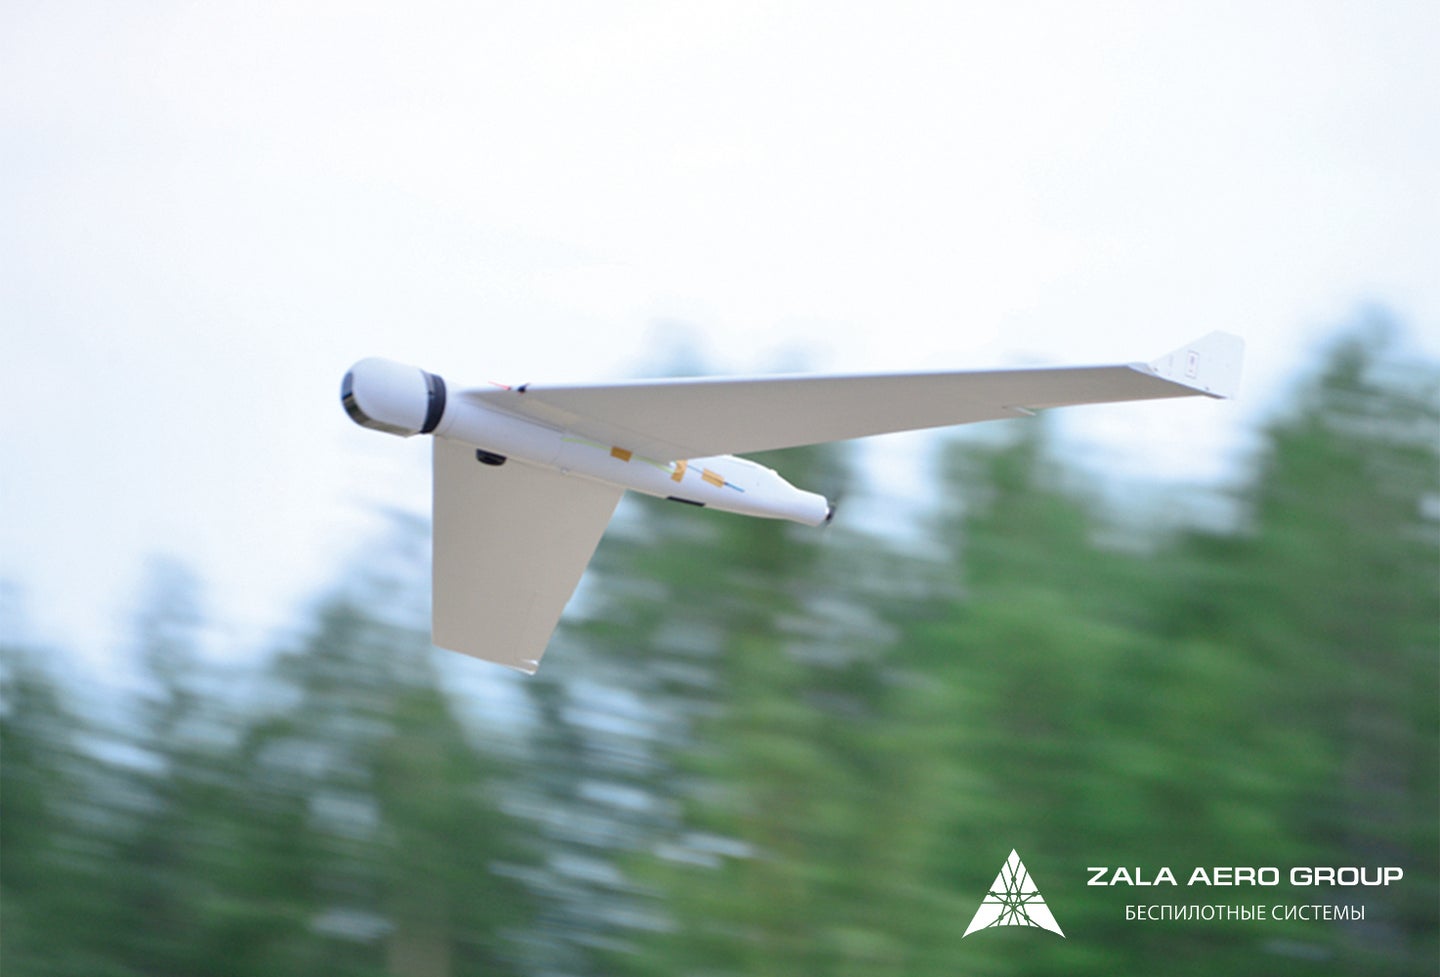 A drone from the Zala Aero Group.